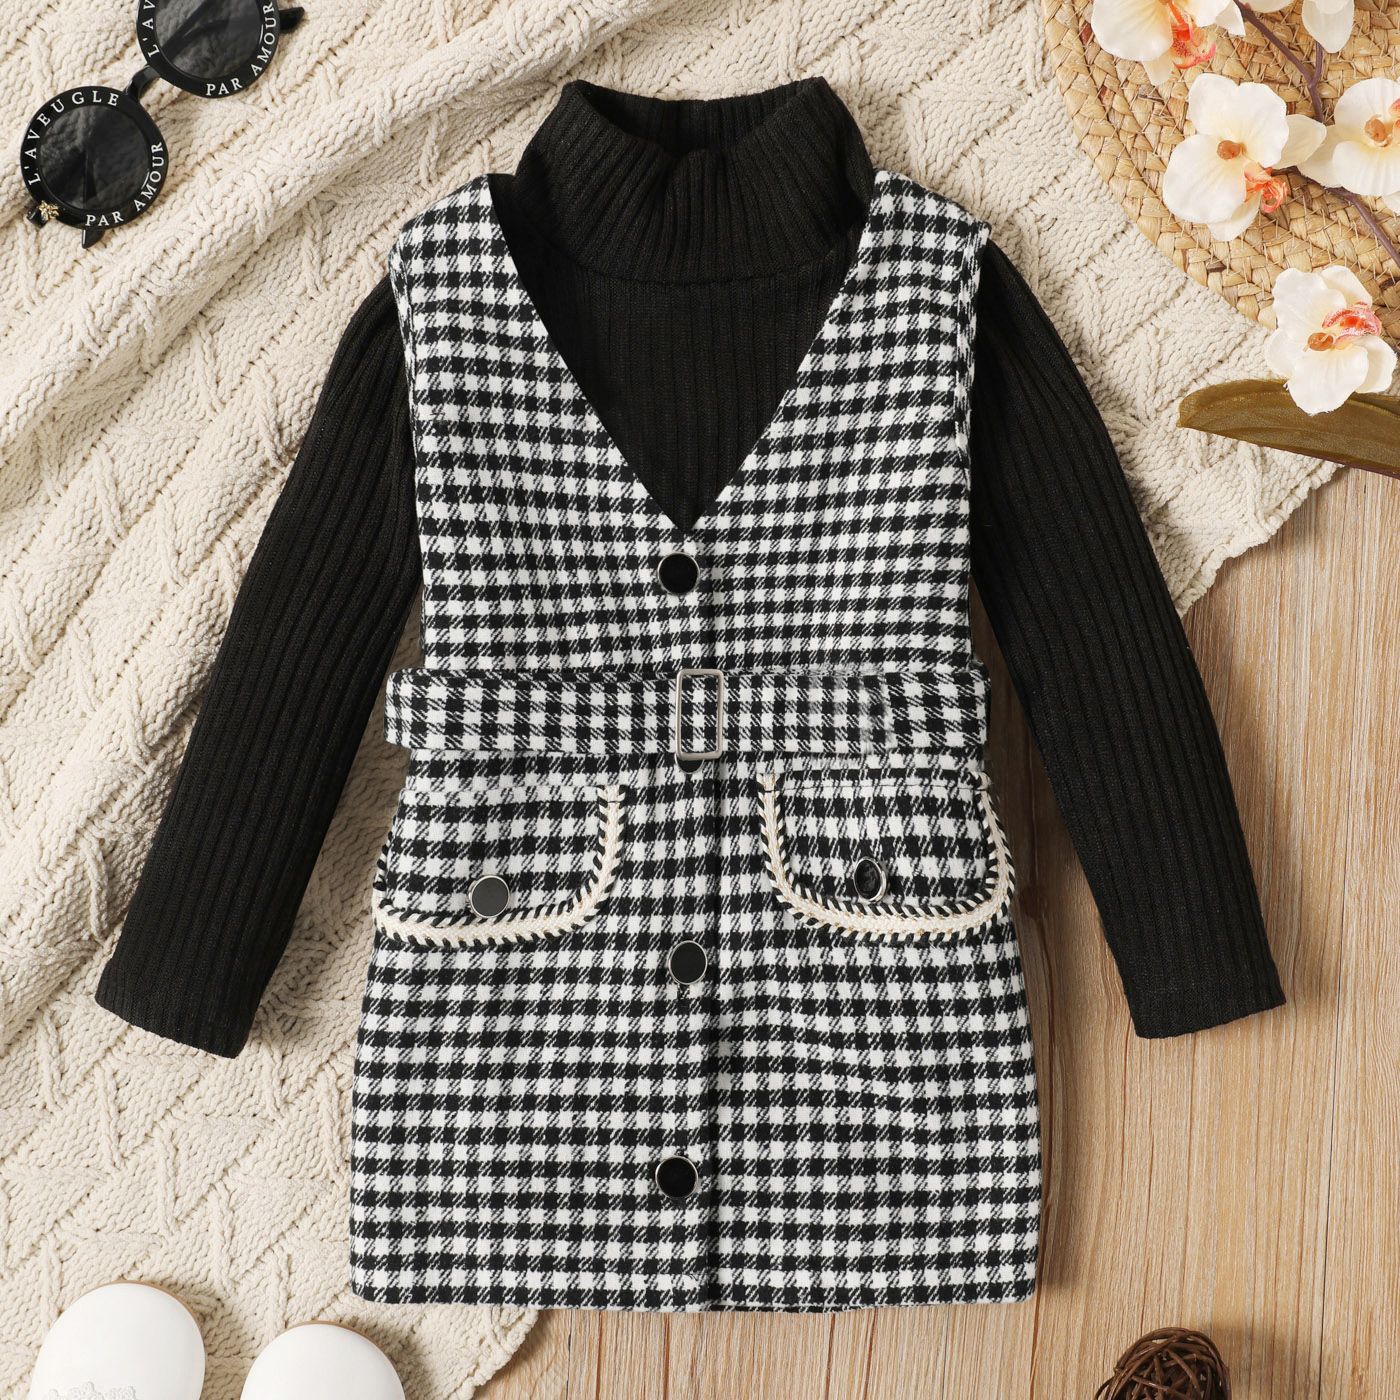 2-piece Toddler Girl Turtleneck Long-sleeve Ribbed Black Sweater and Belted Plaid Tweed Overall Dres